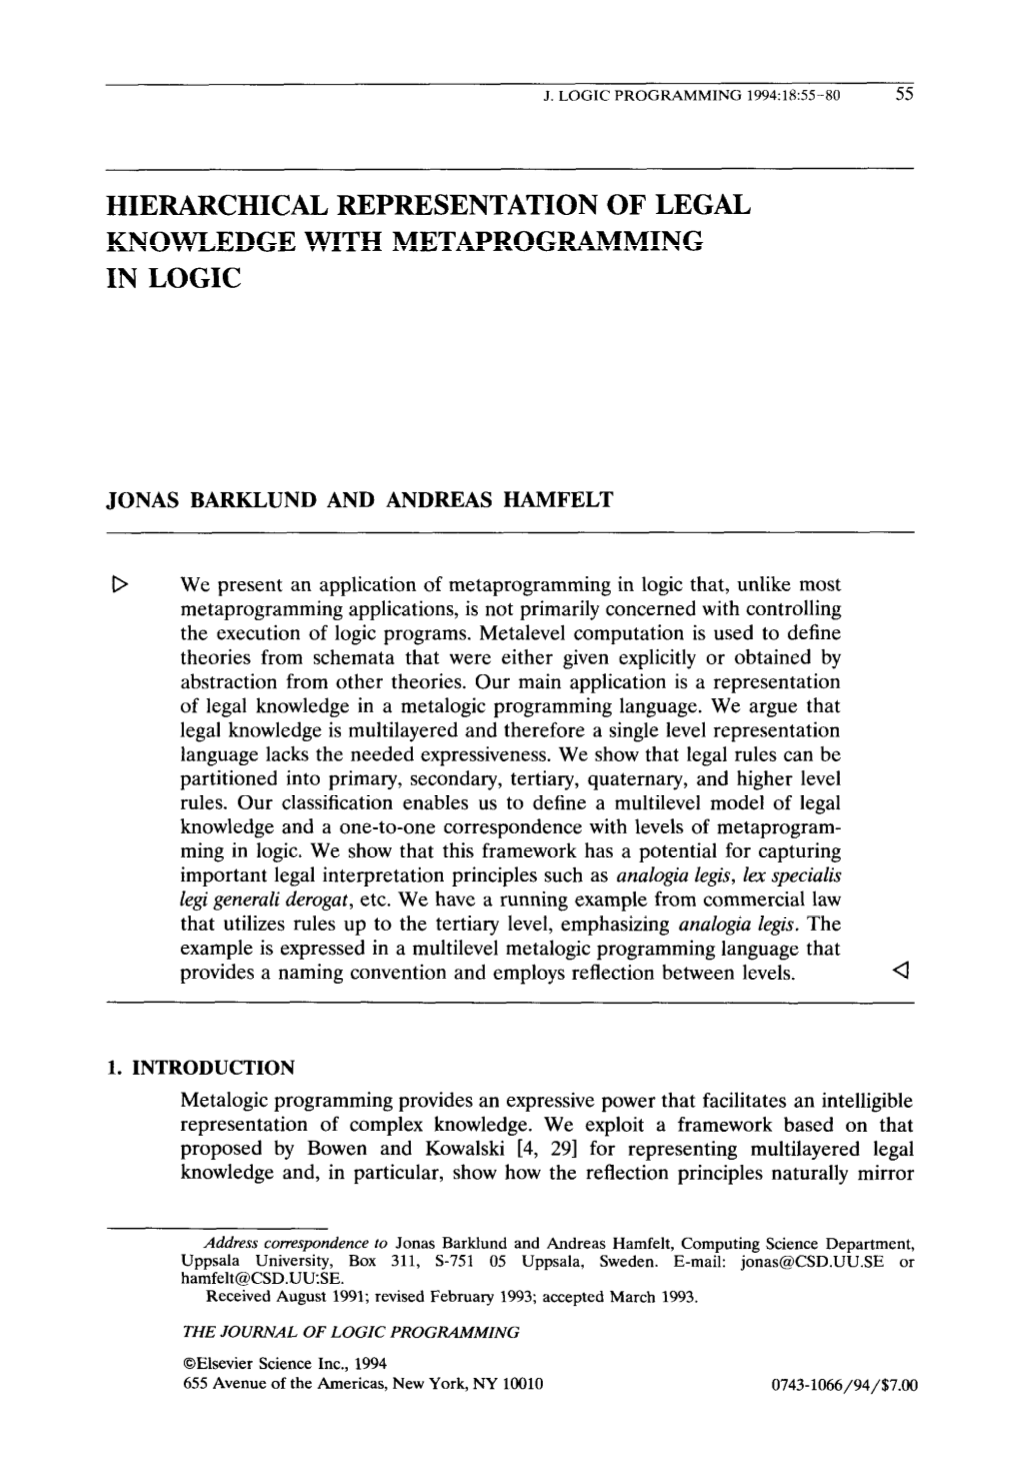 Hierarchical Representation of Legal Knowledge with Metaprogramming in Logic